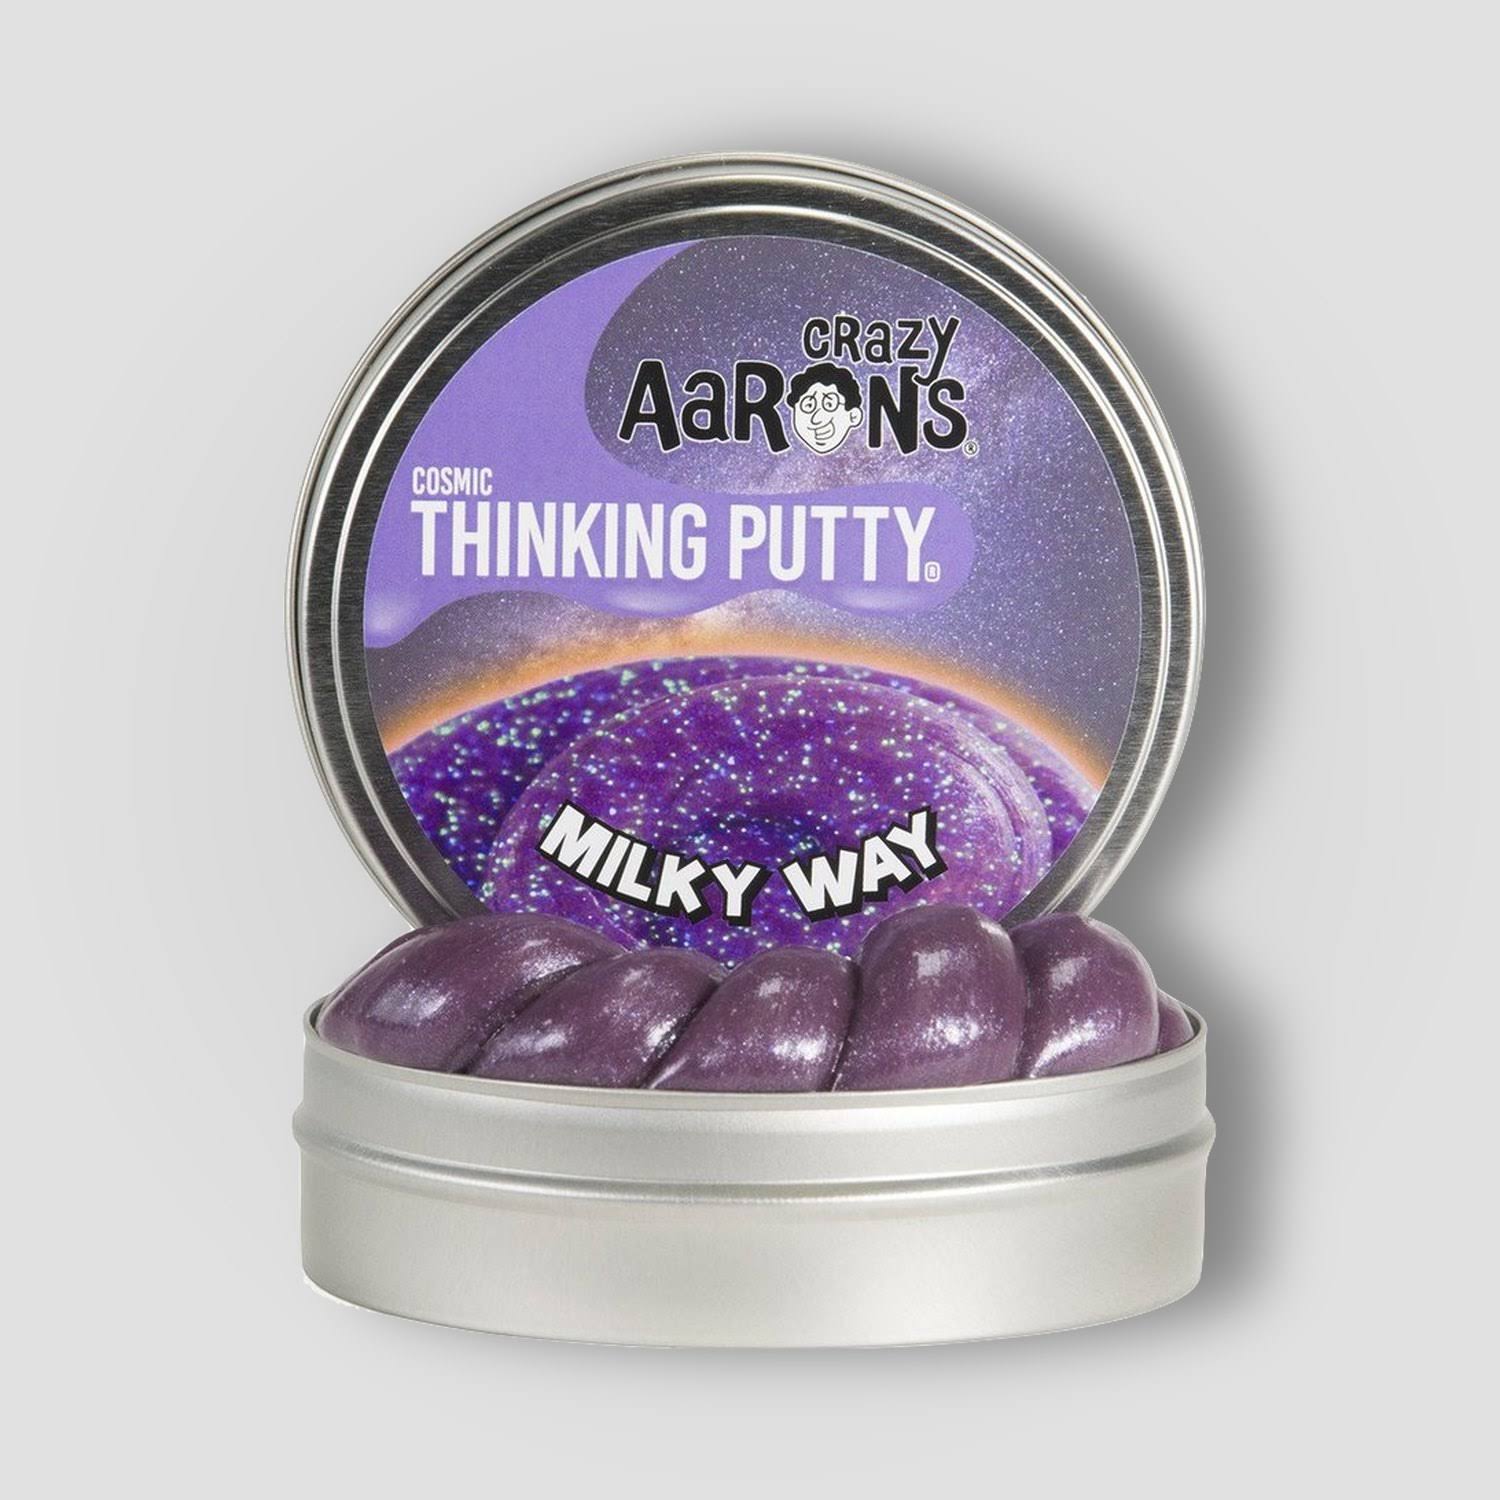 Crazy Aarons Thinking Putty, Cosmic Milky Way - 3.2 oz pack